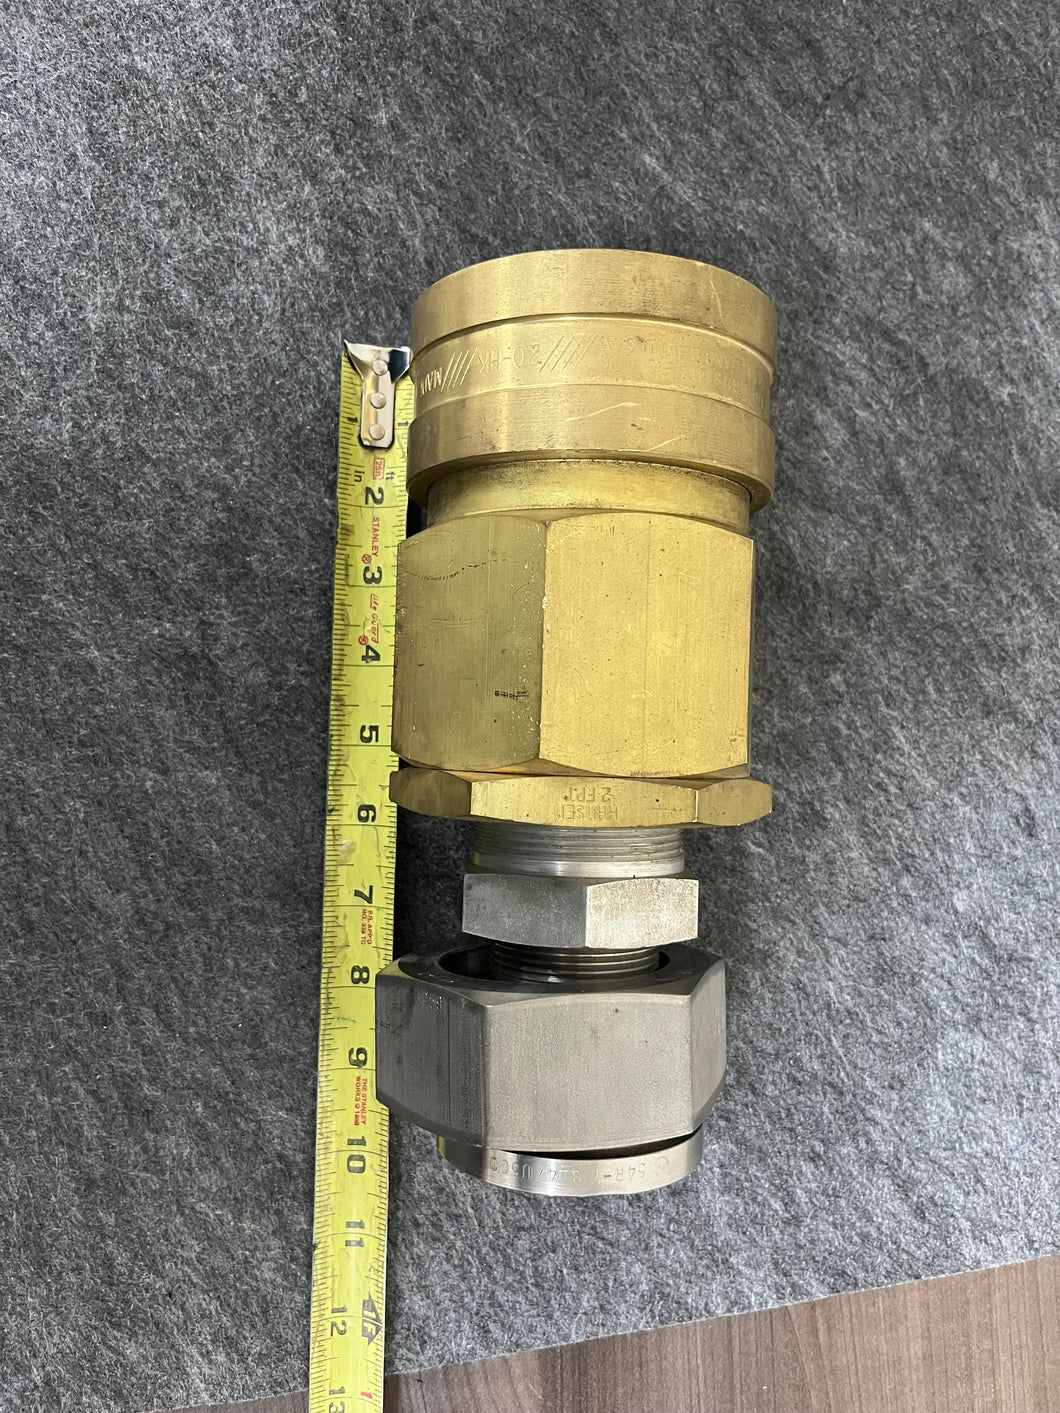 Hanson 20-HK Quick Connect Coupling With 54R-7comes as shown